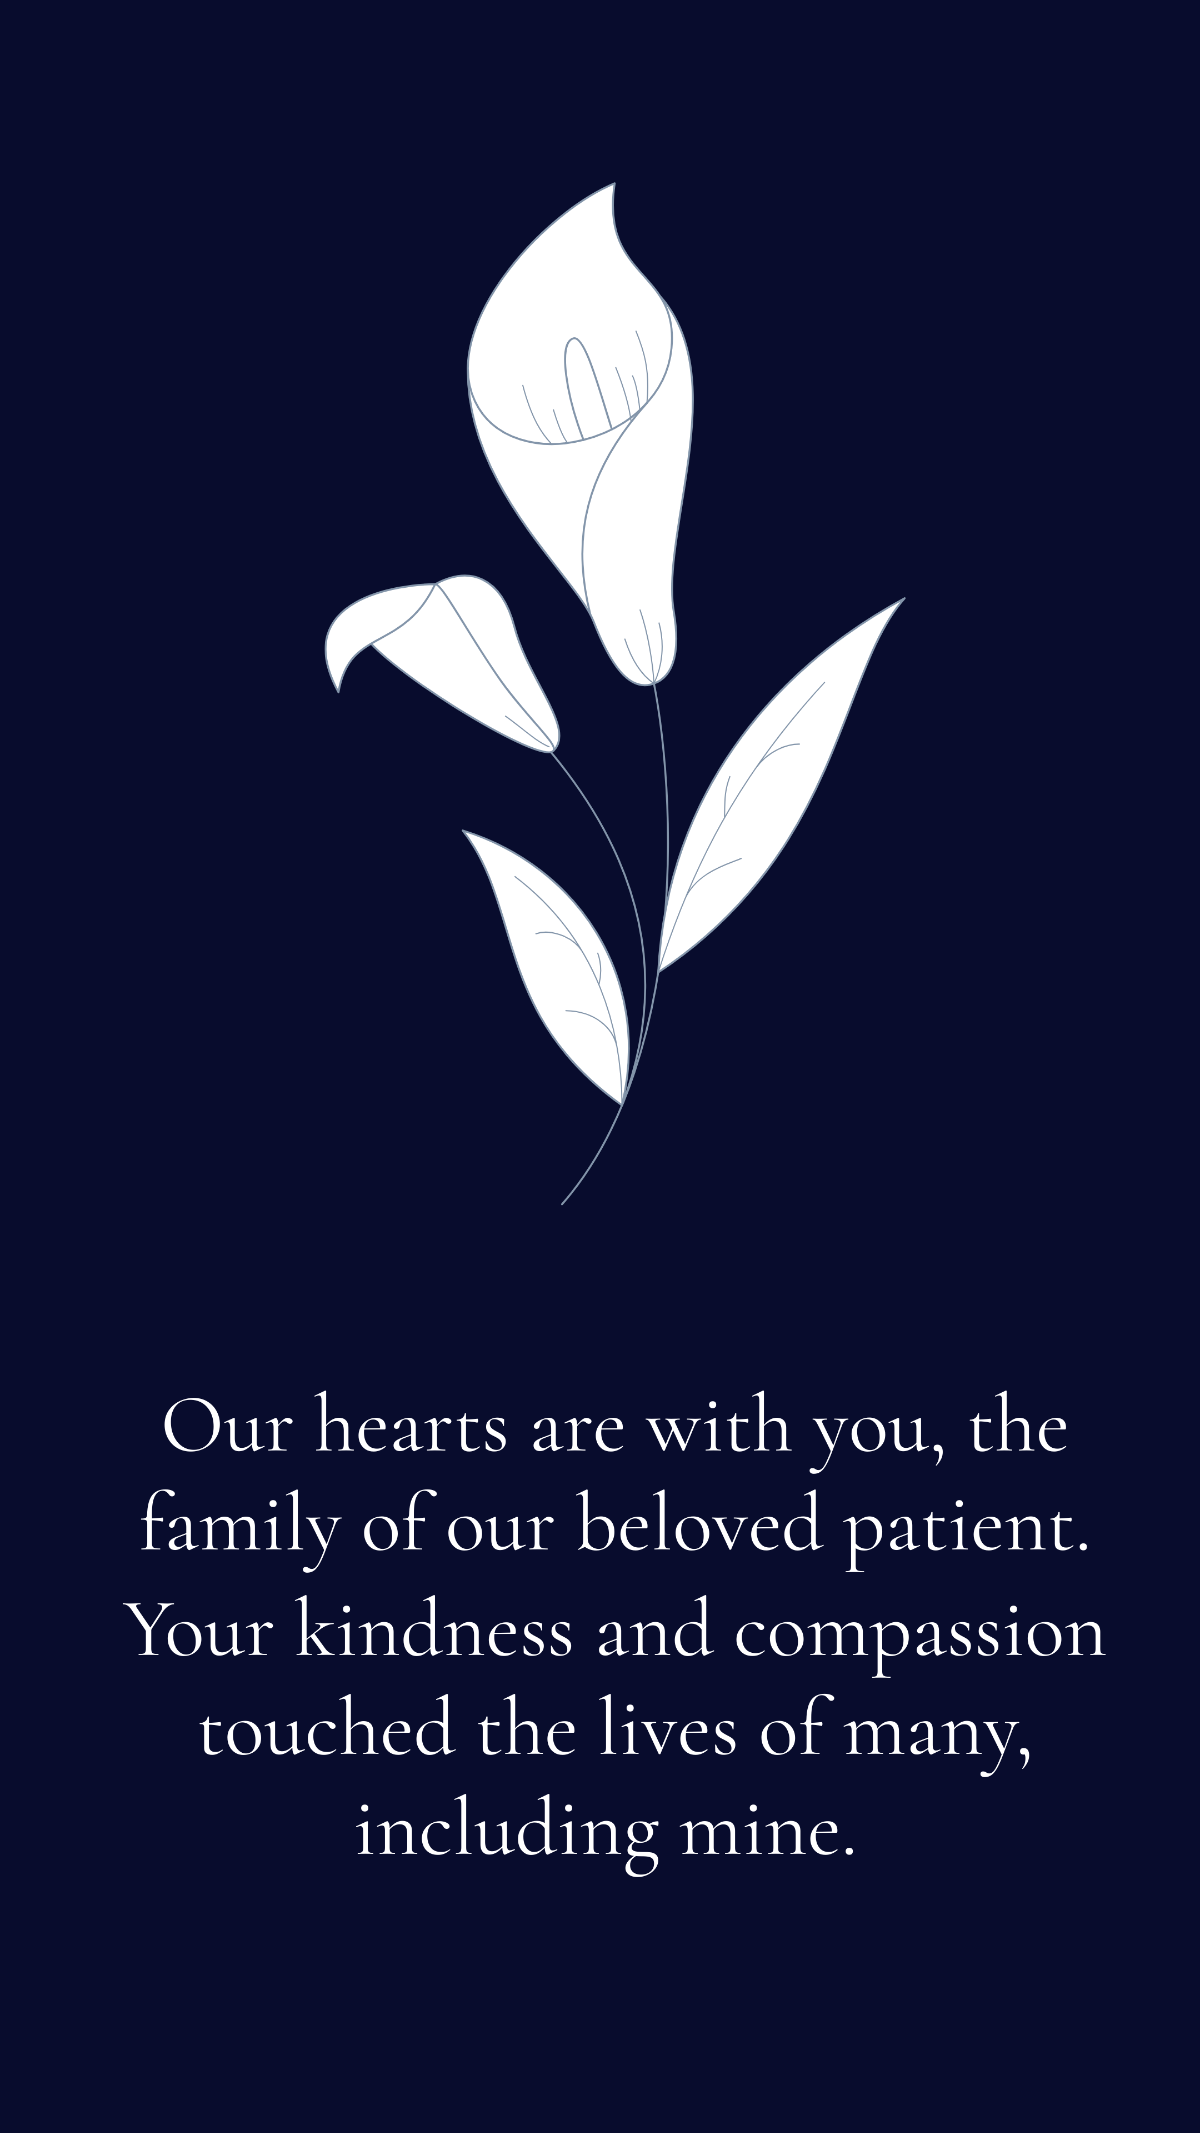 Condolence Message To Patient's Family